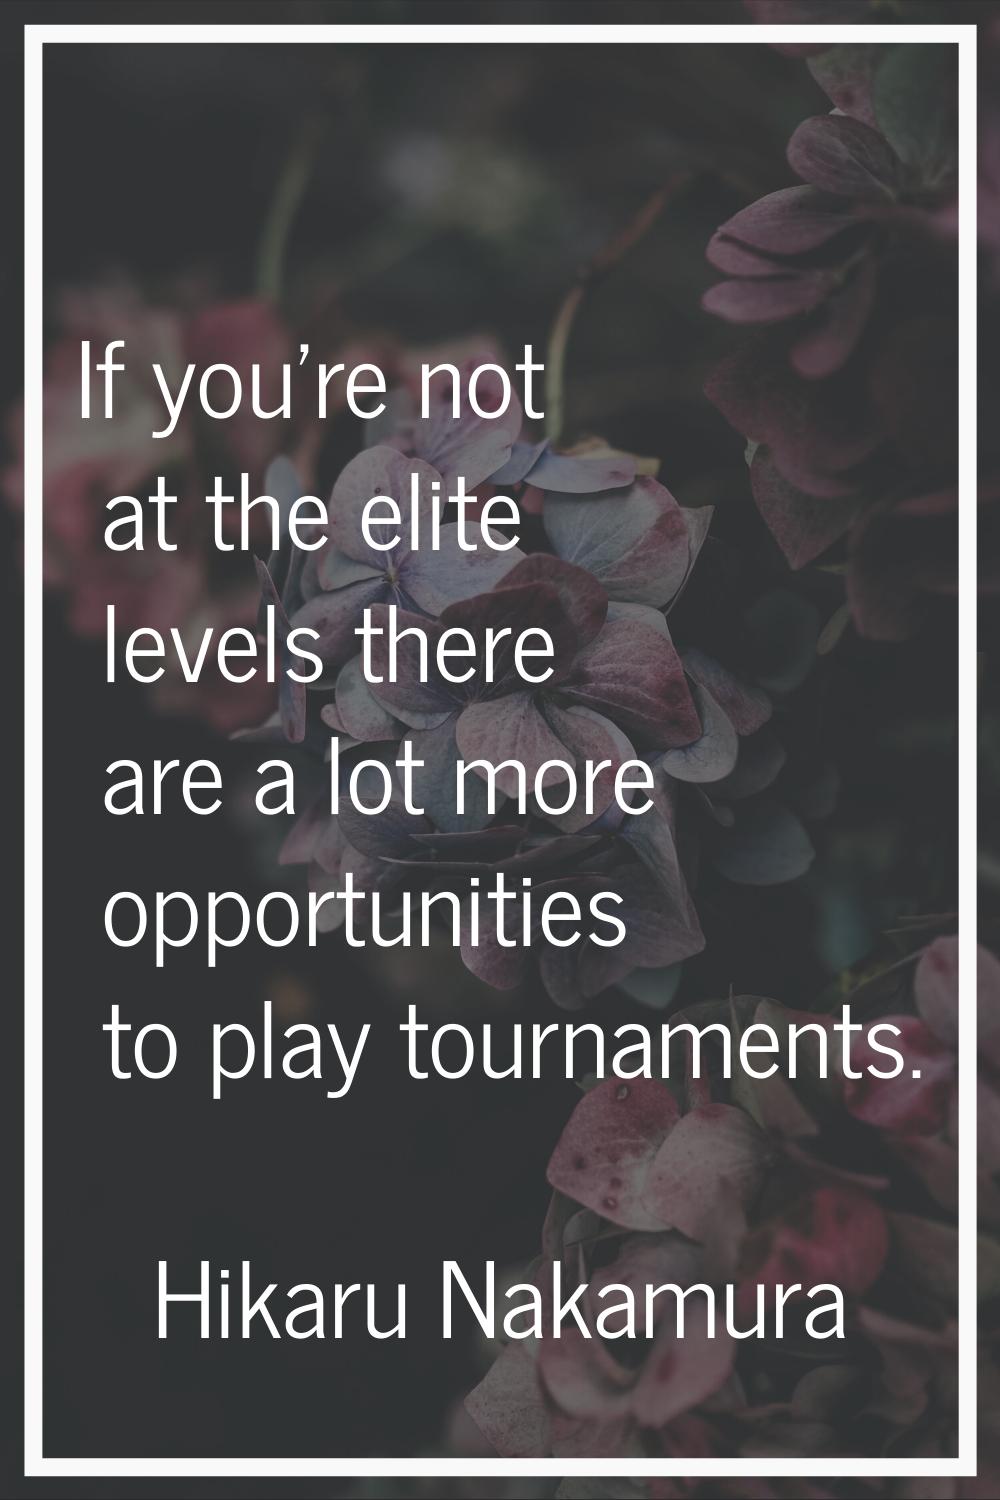 If you're not at the elite levels there are a lot more opportunities to play tournaments.